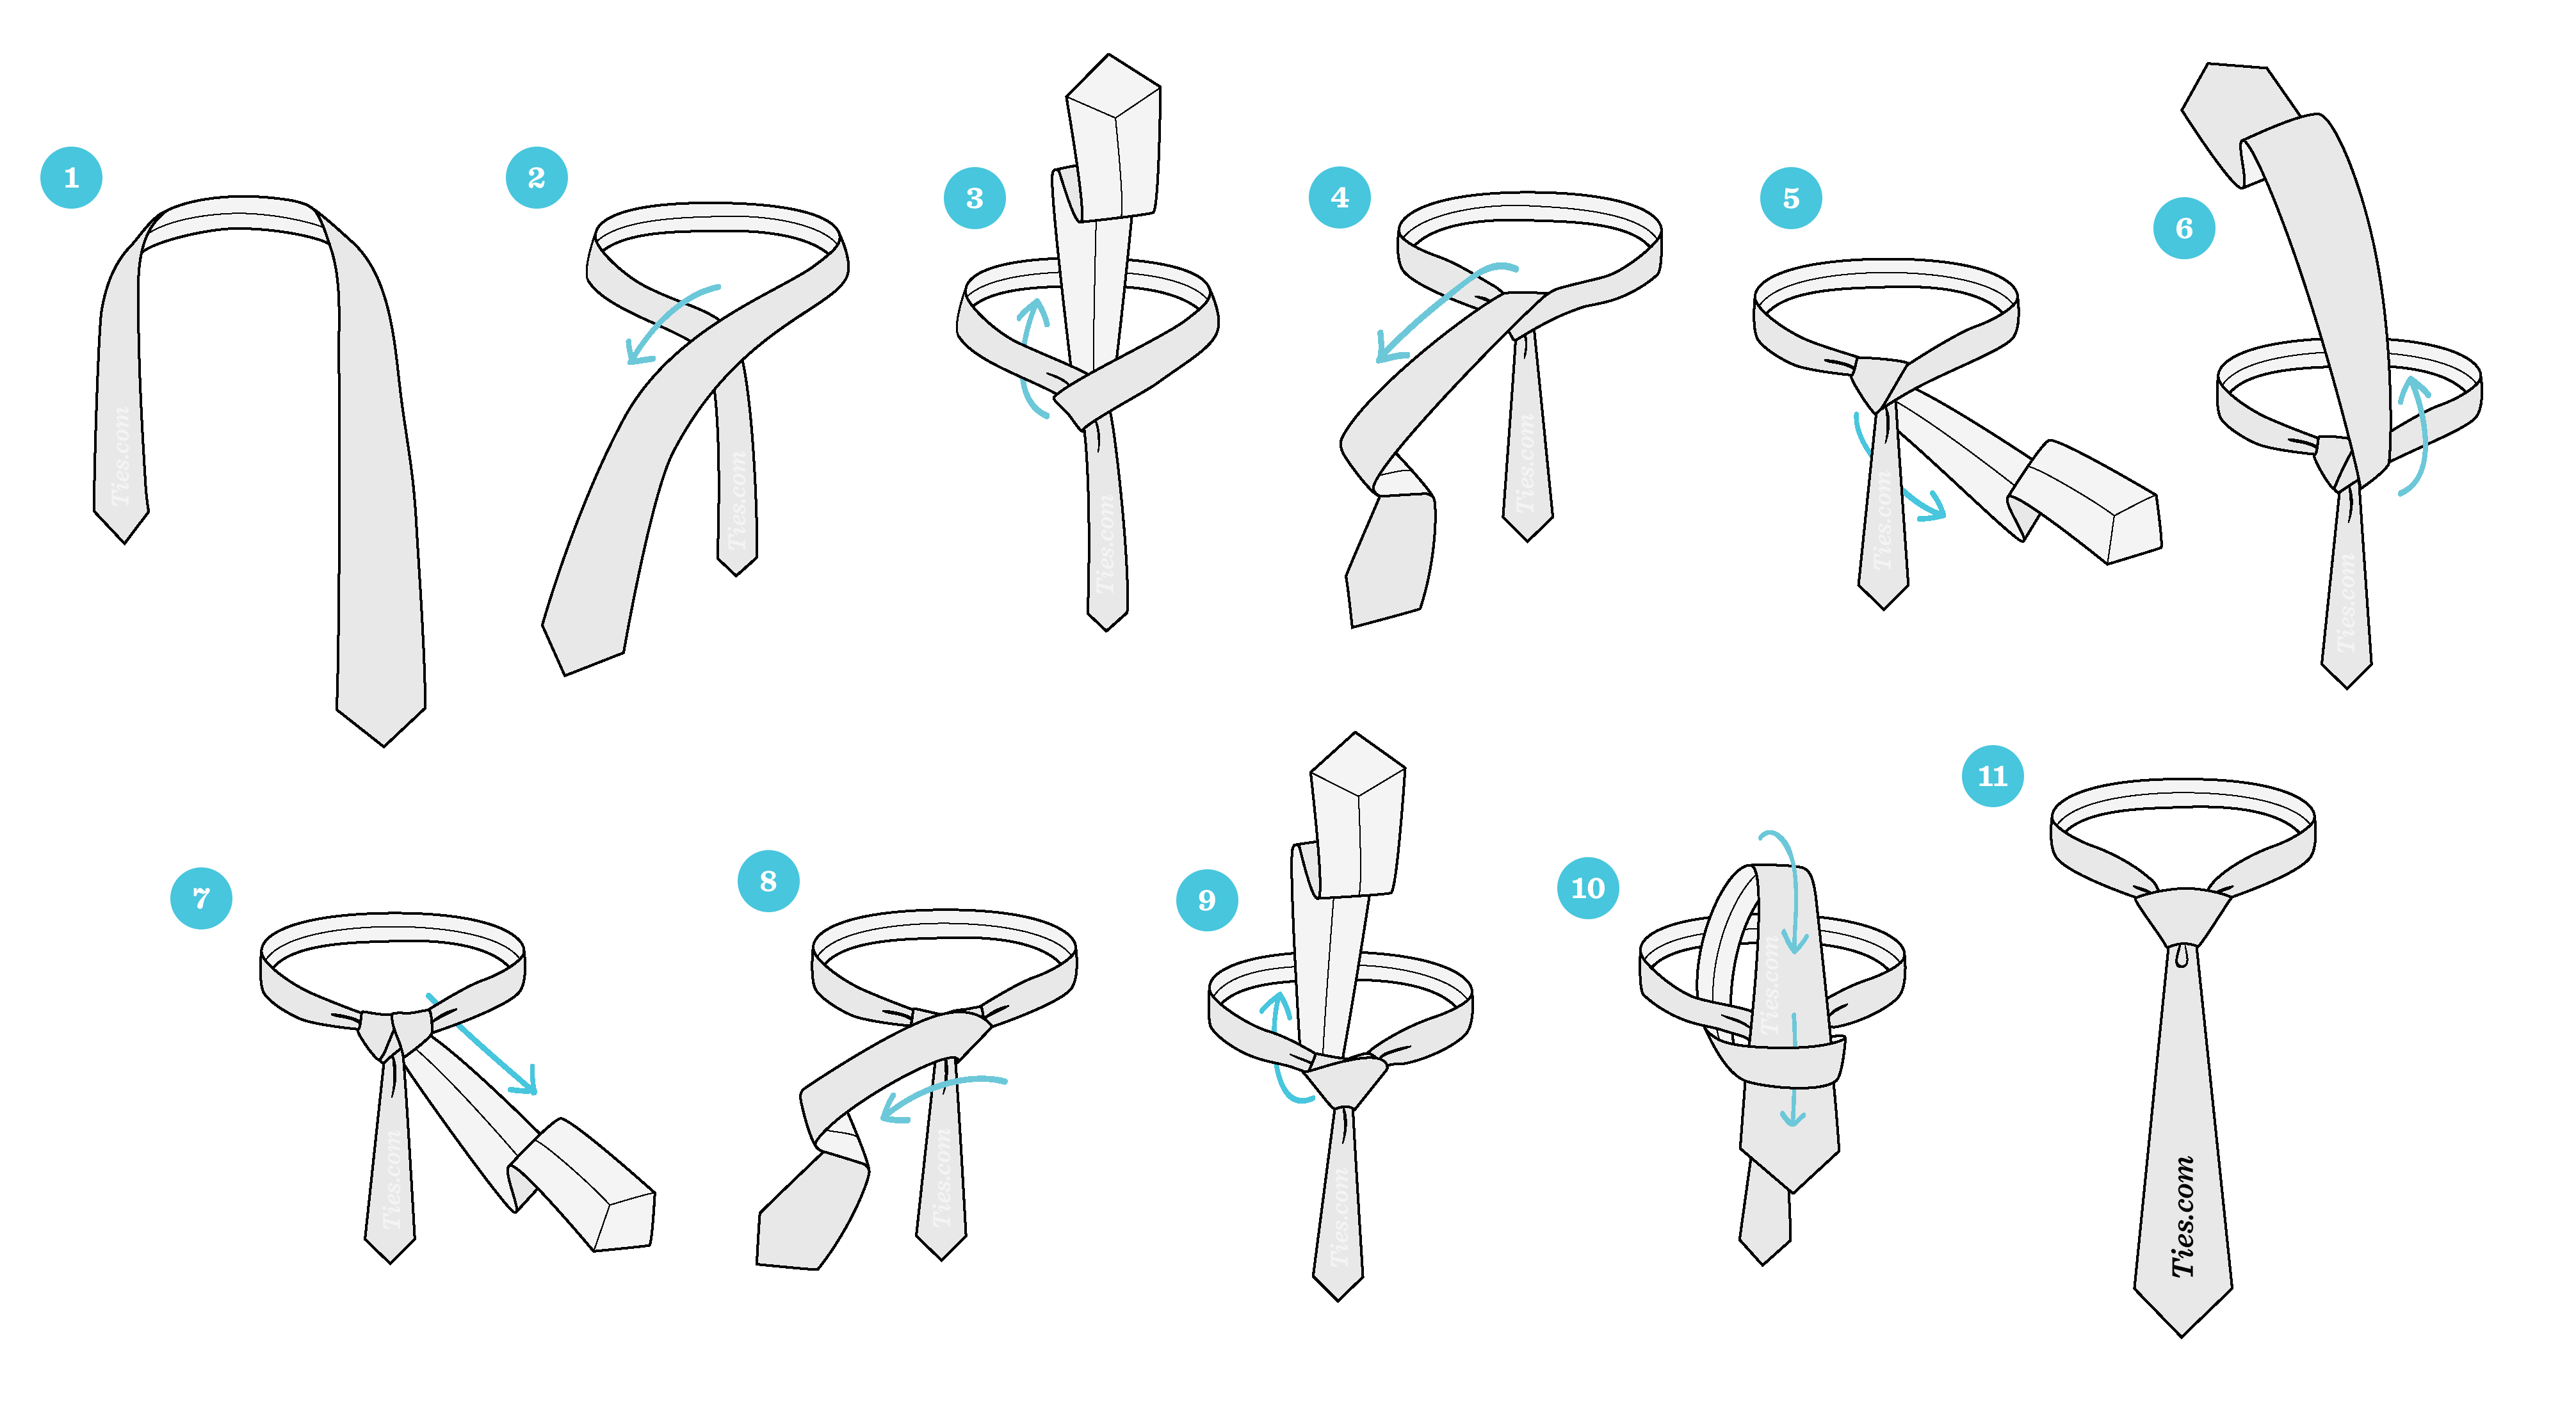 knot tying guide printable